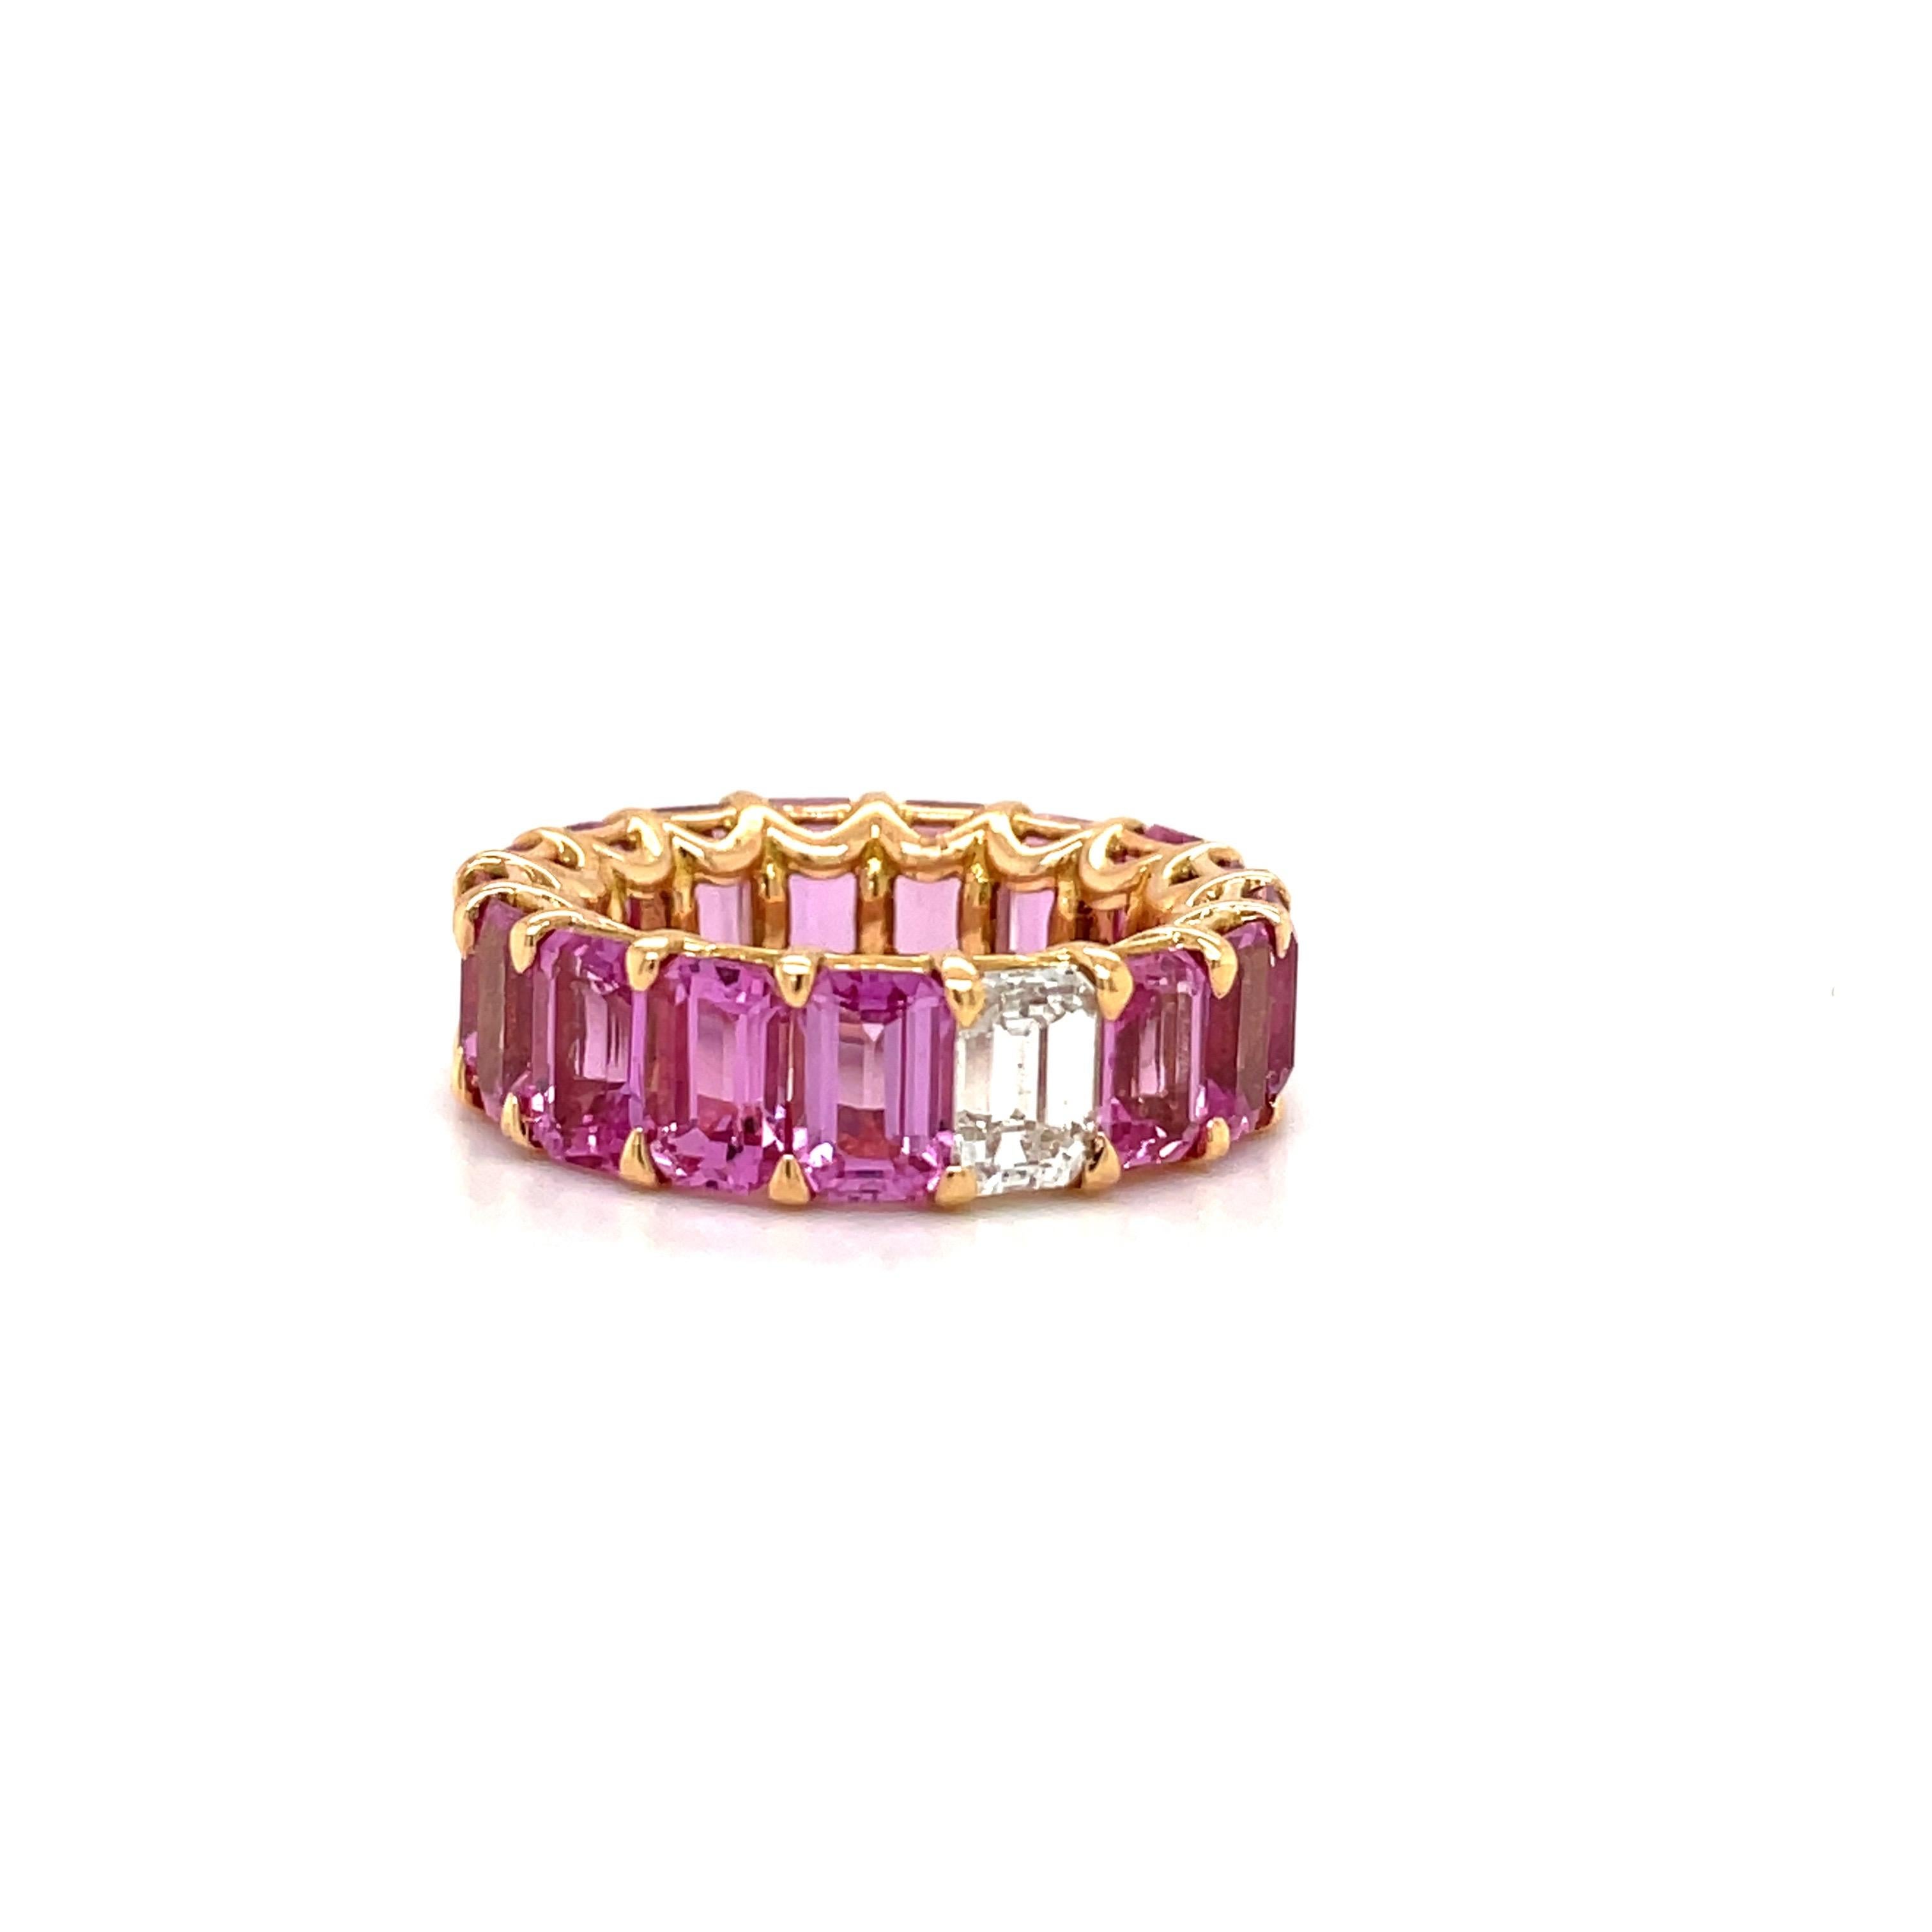 Magnificent 18 karat rose gold eternity band . This unique band is set with 16 emerald cut pink sapphires and 1 emerald cut diamond in the center. This is a shared prong setting with 